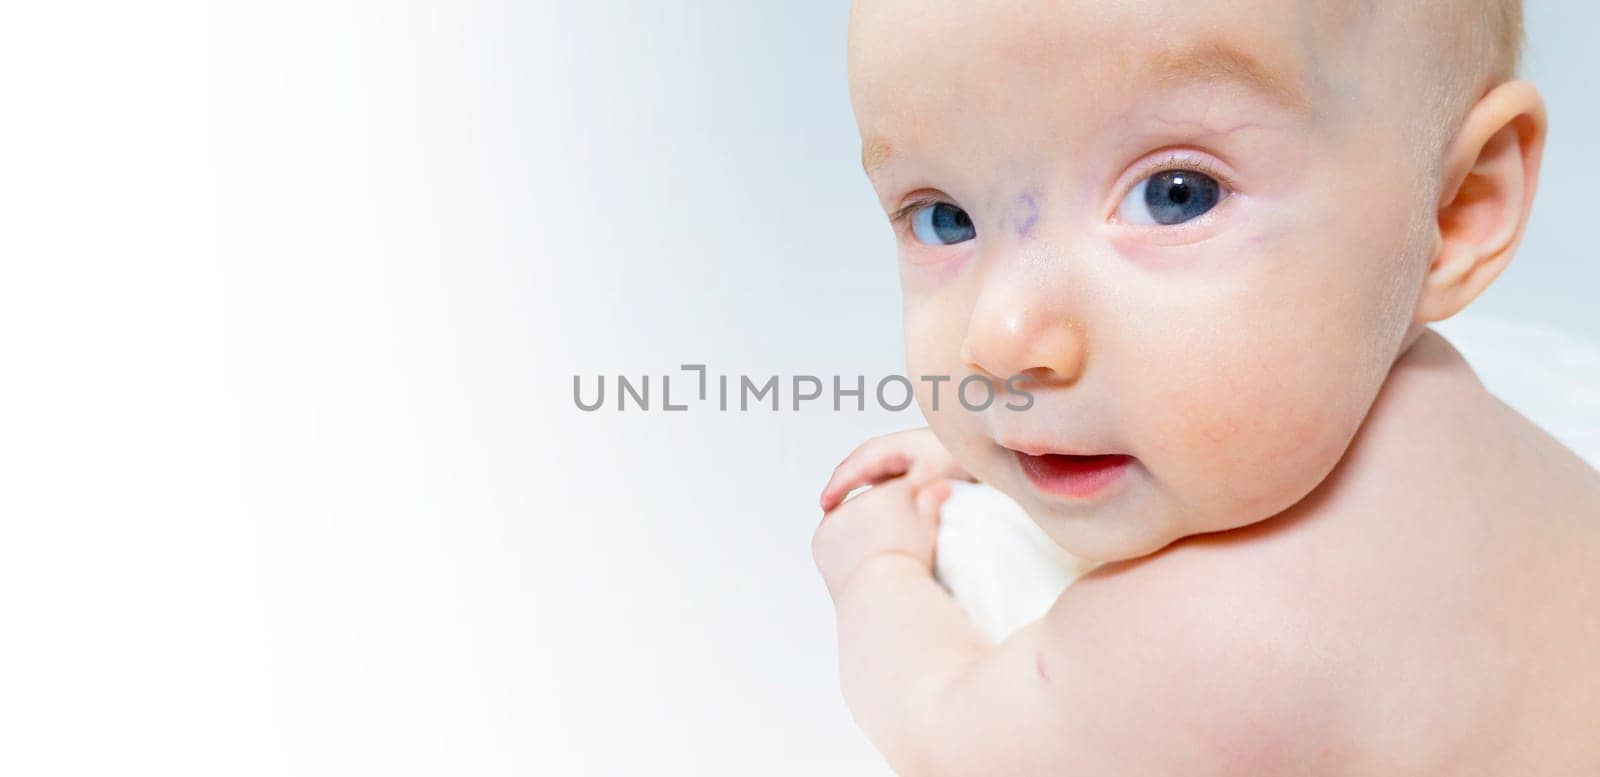 a baby with a hemangioma on his neck lies on a white background by kajasja